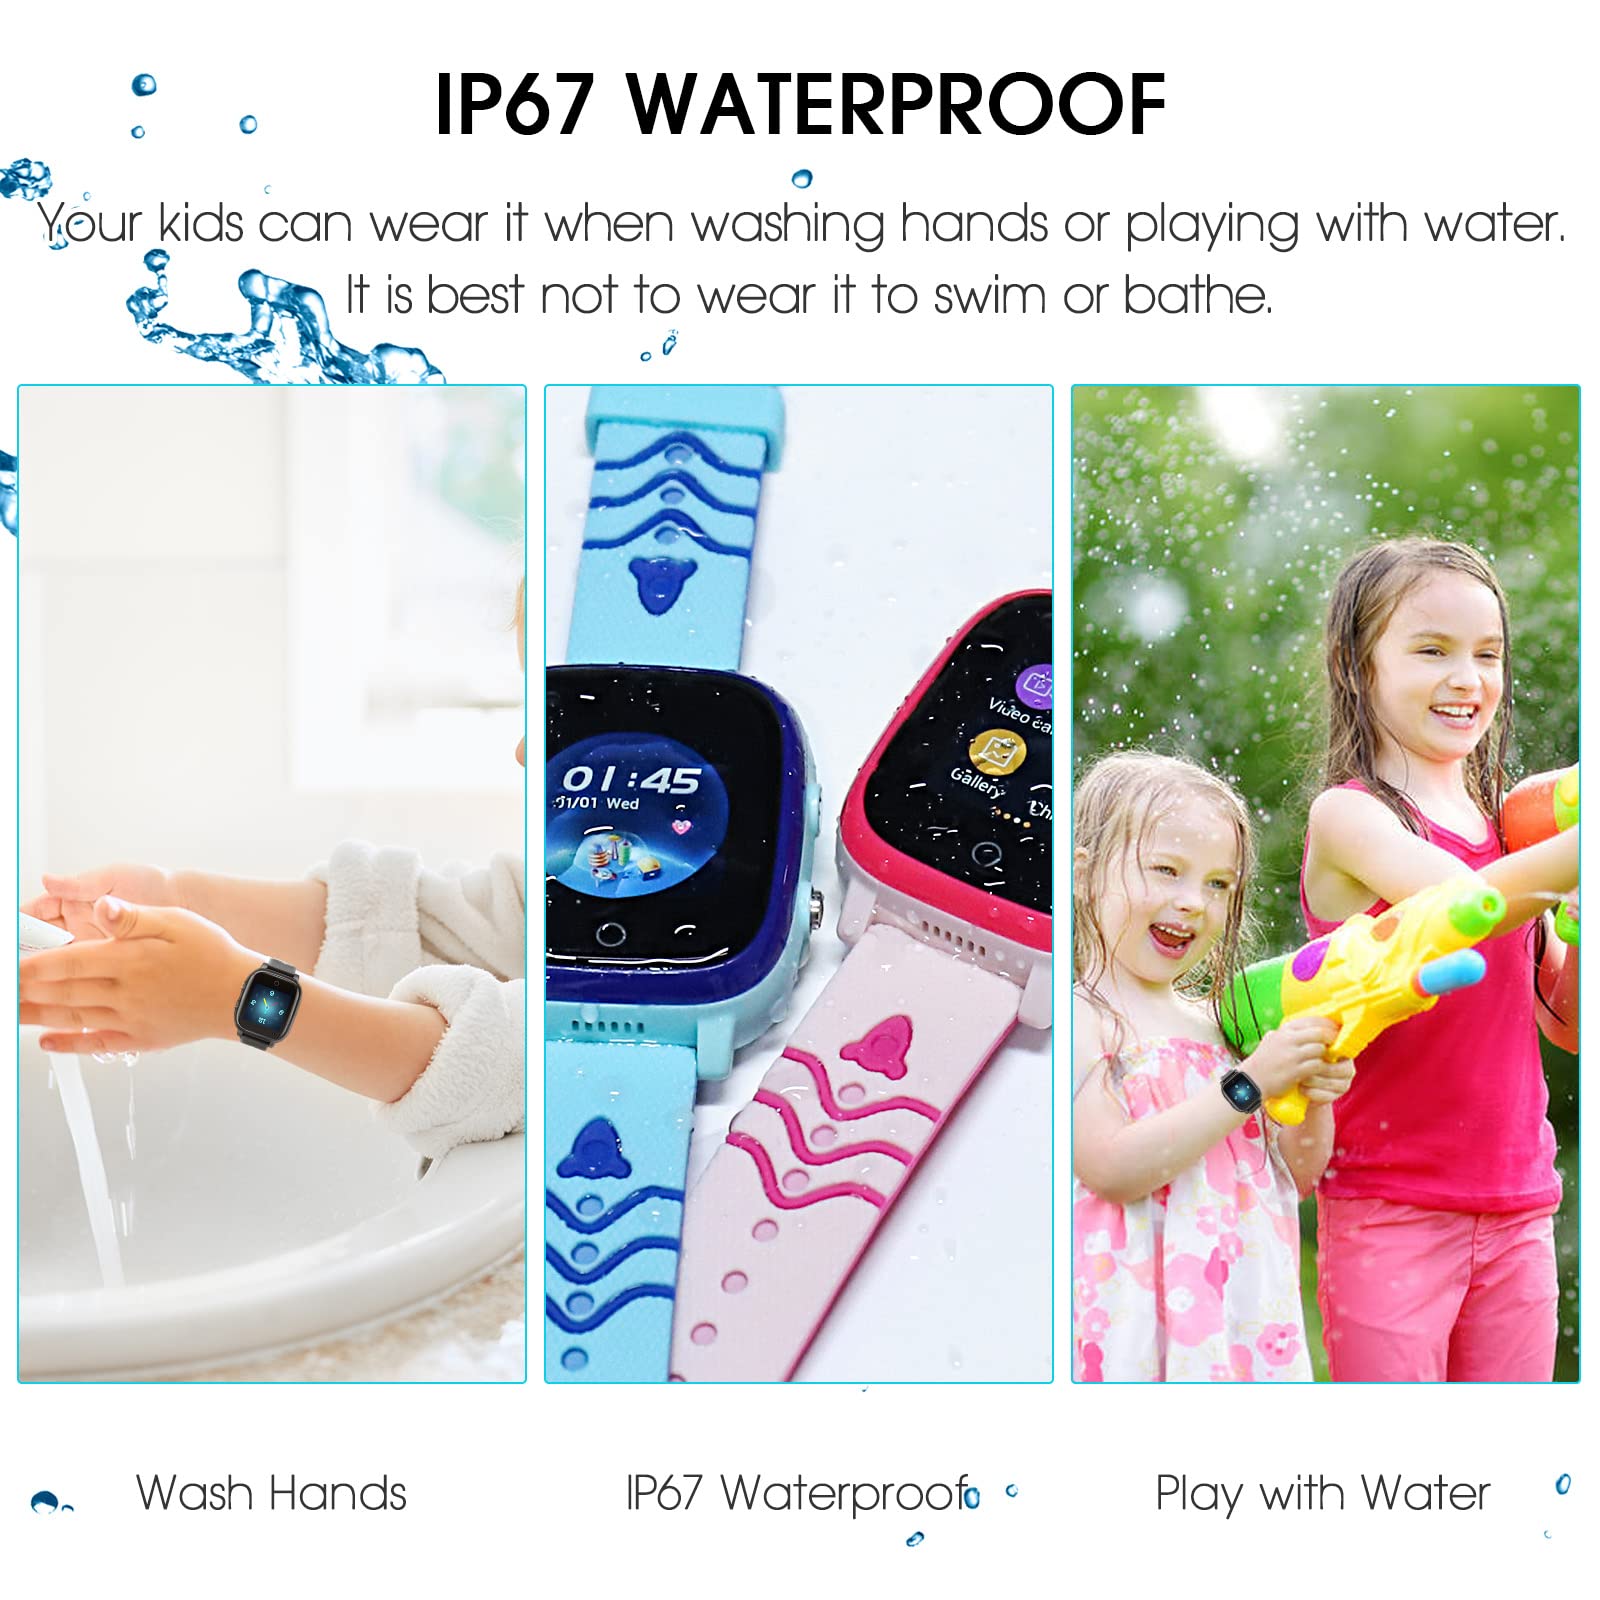 cjc 4G Kids Smart Watch with GPS Tracker and Calling, IP67 Waterproof, 2-Way Calls, GPS Tracker, SOS Kids Cell Phone Wrist Watch for Age 3-14 Girls Boys Girls Christmas BirthdayBirthday Gifts (Black)